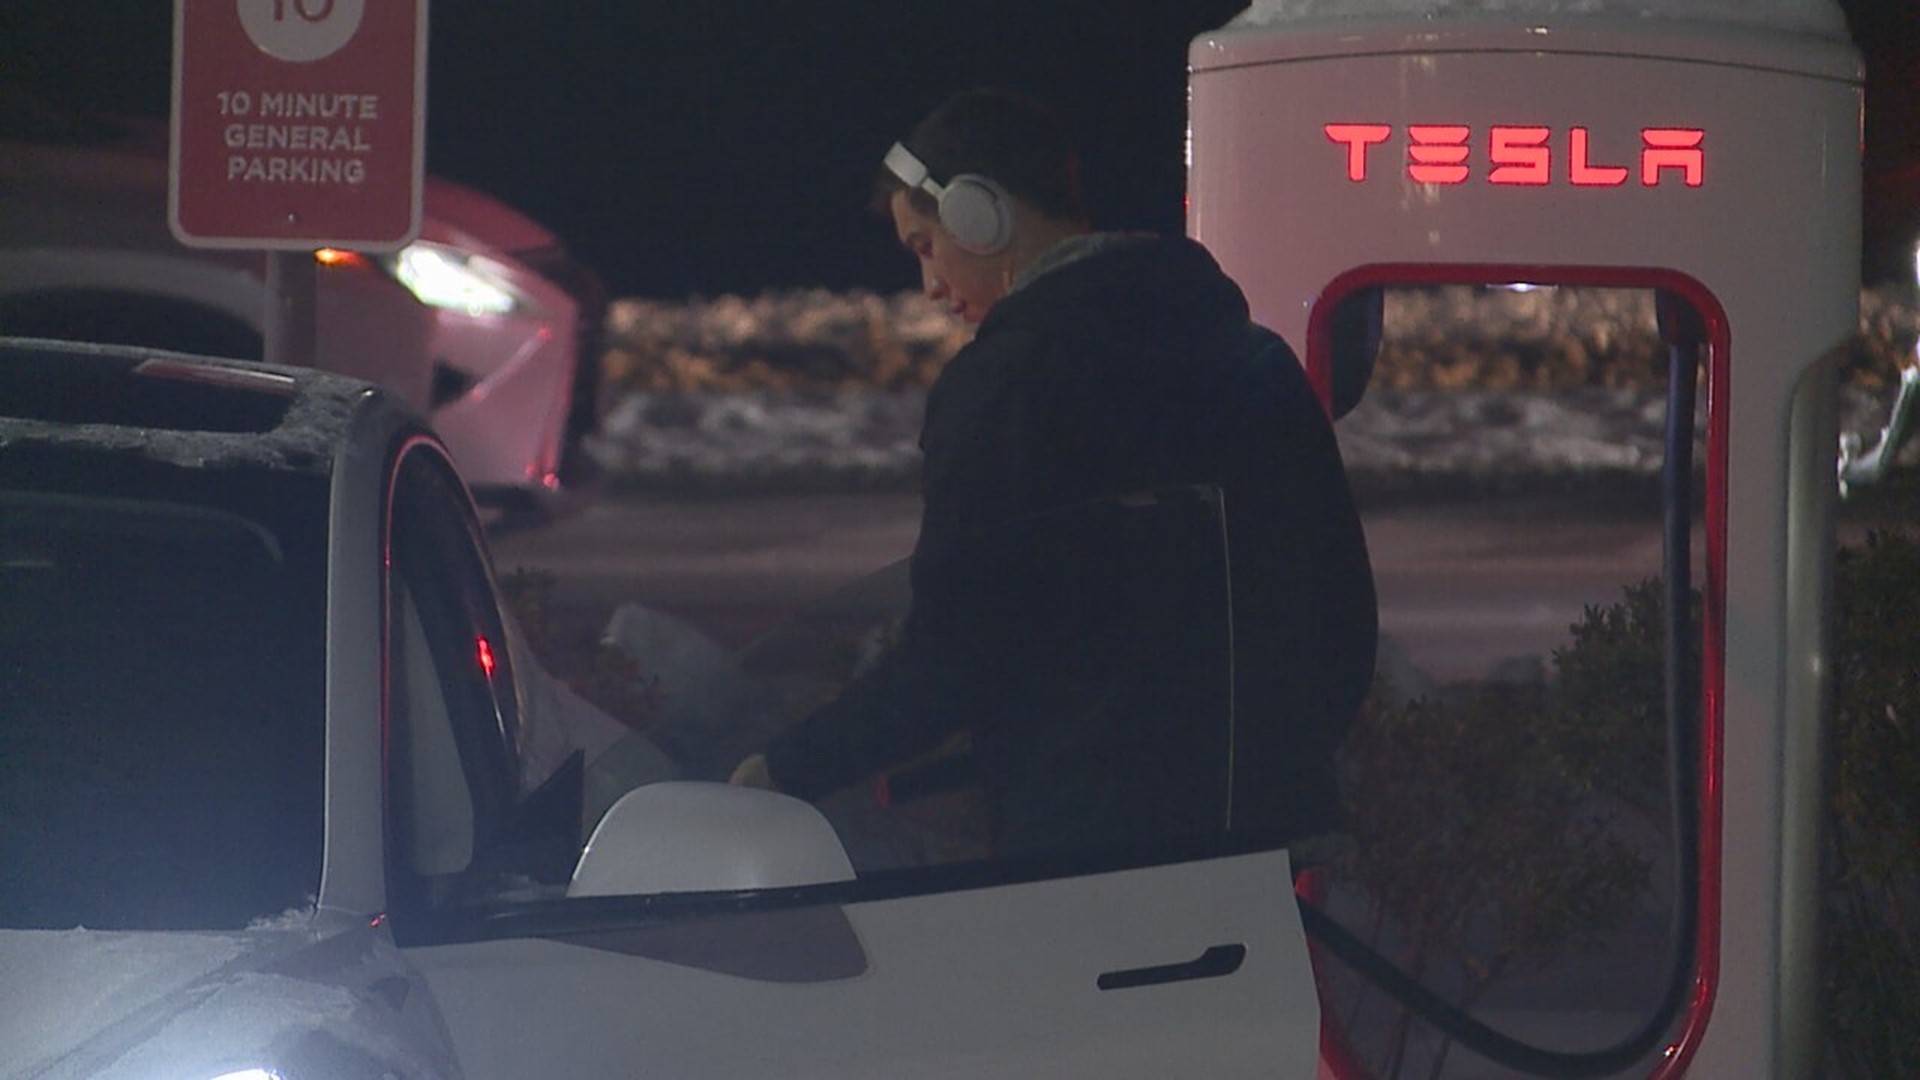 Experts say cold weather can cause 30% loss in battery range and a tripled charge time for electric vehicles.